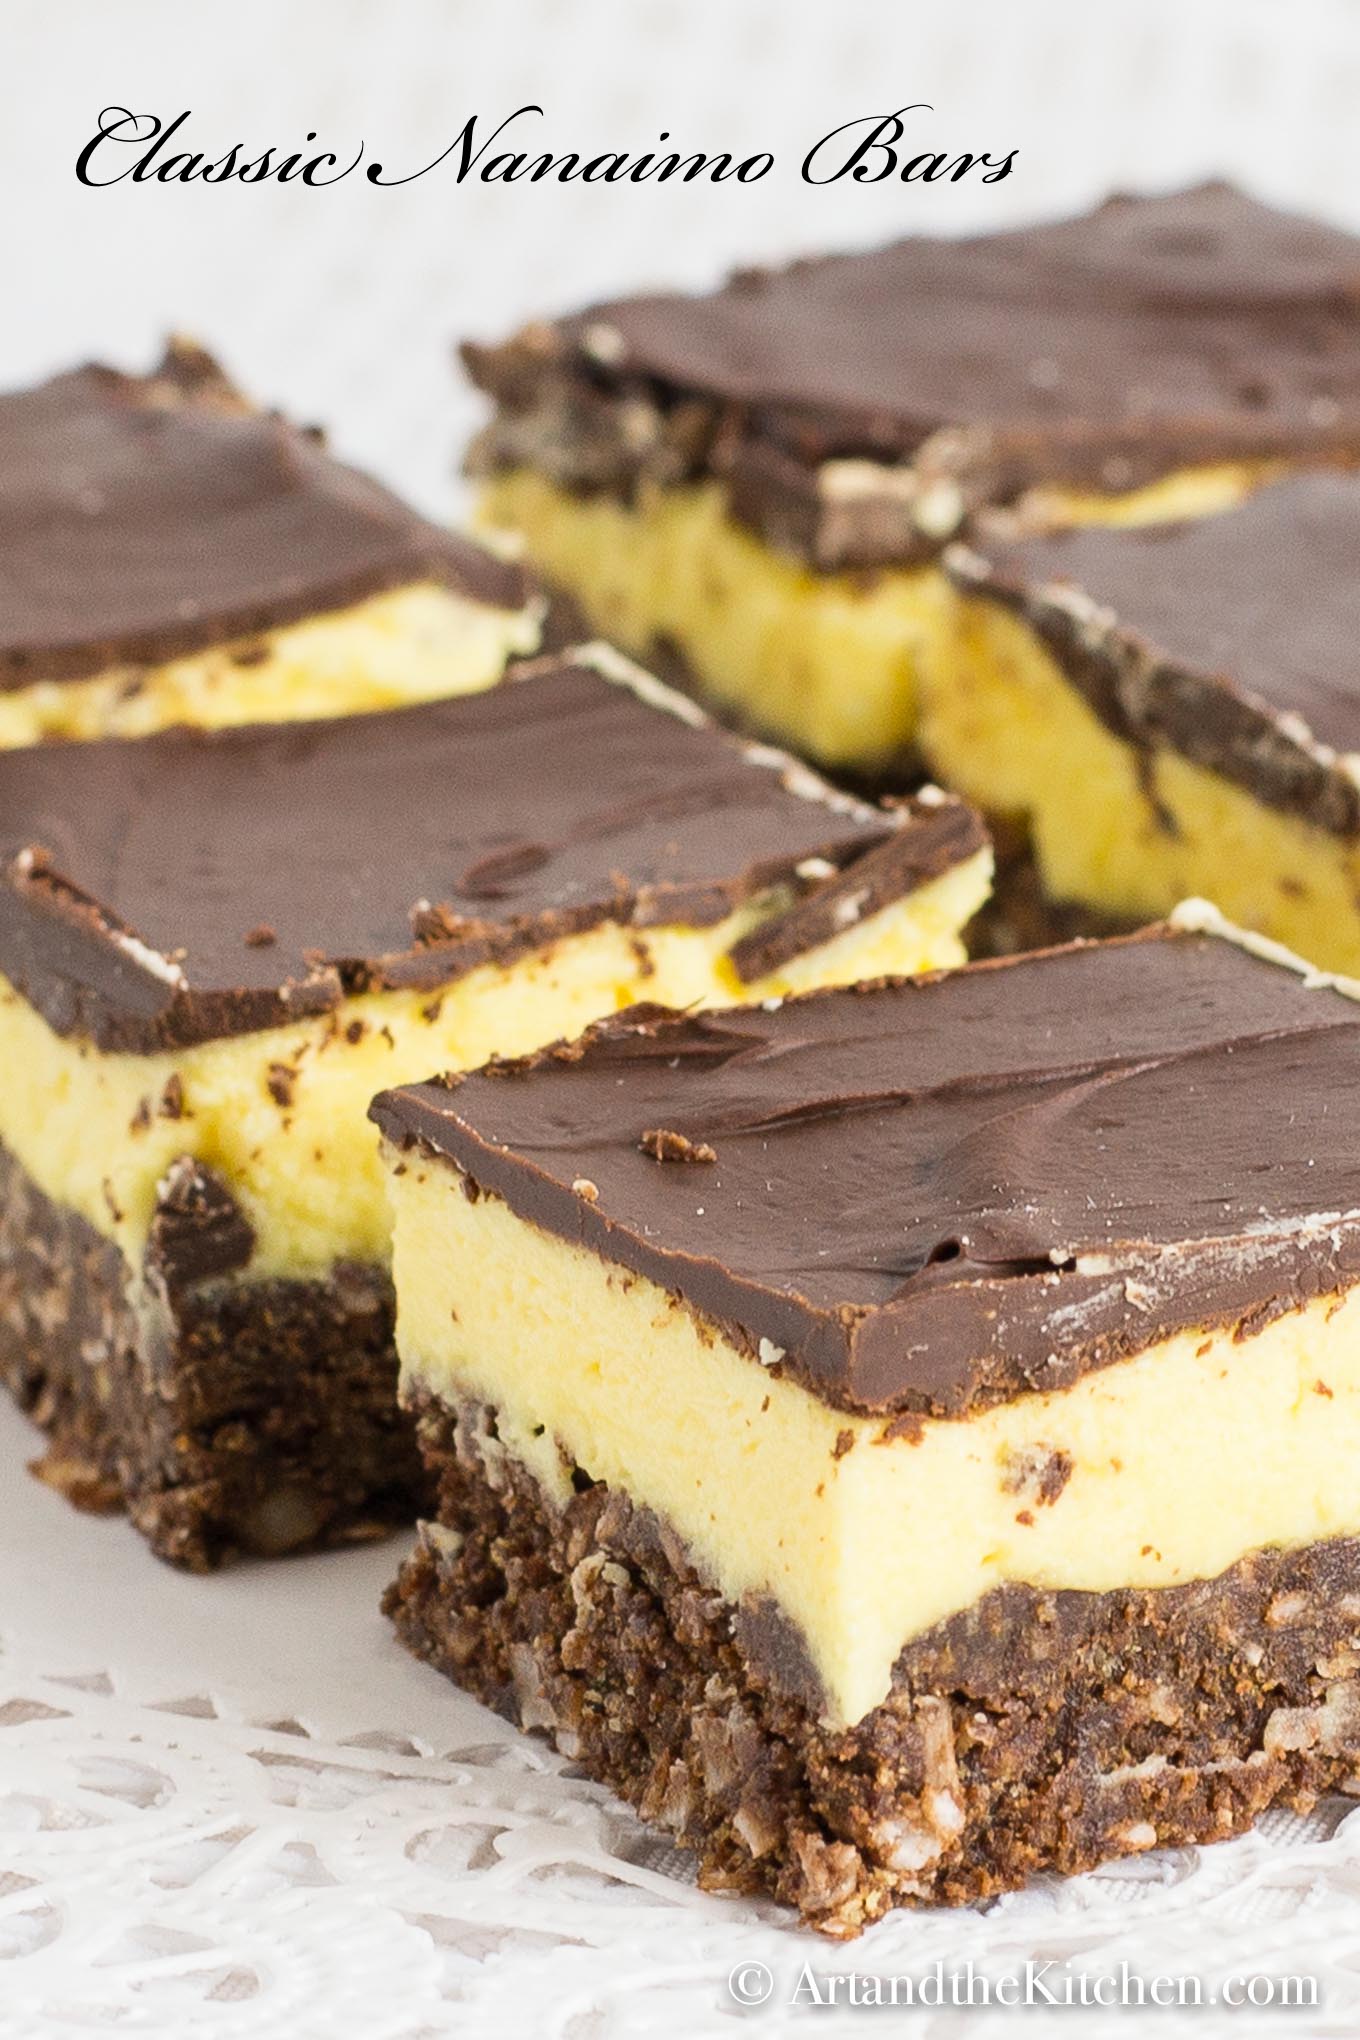 Rows of cut up Nanaimo bars made with layers of chocolate, yellow custard and chocolate coconut